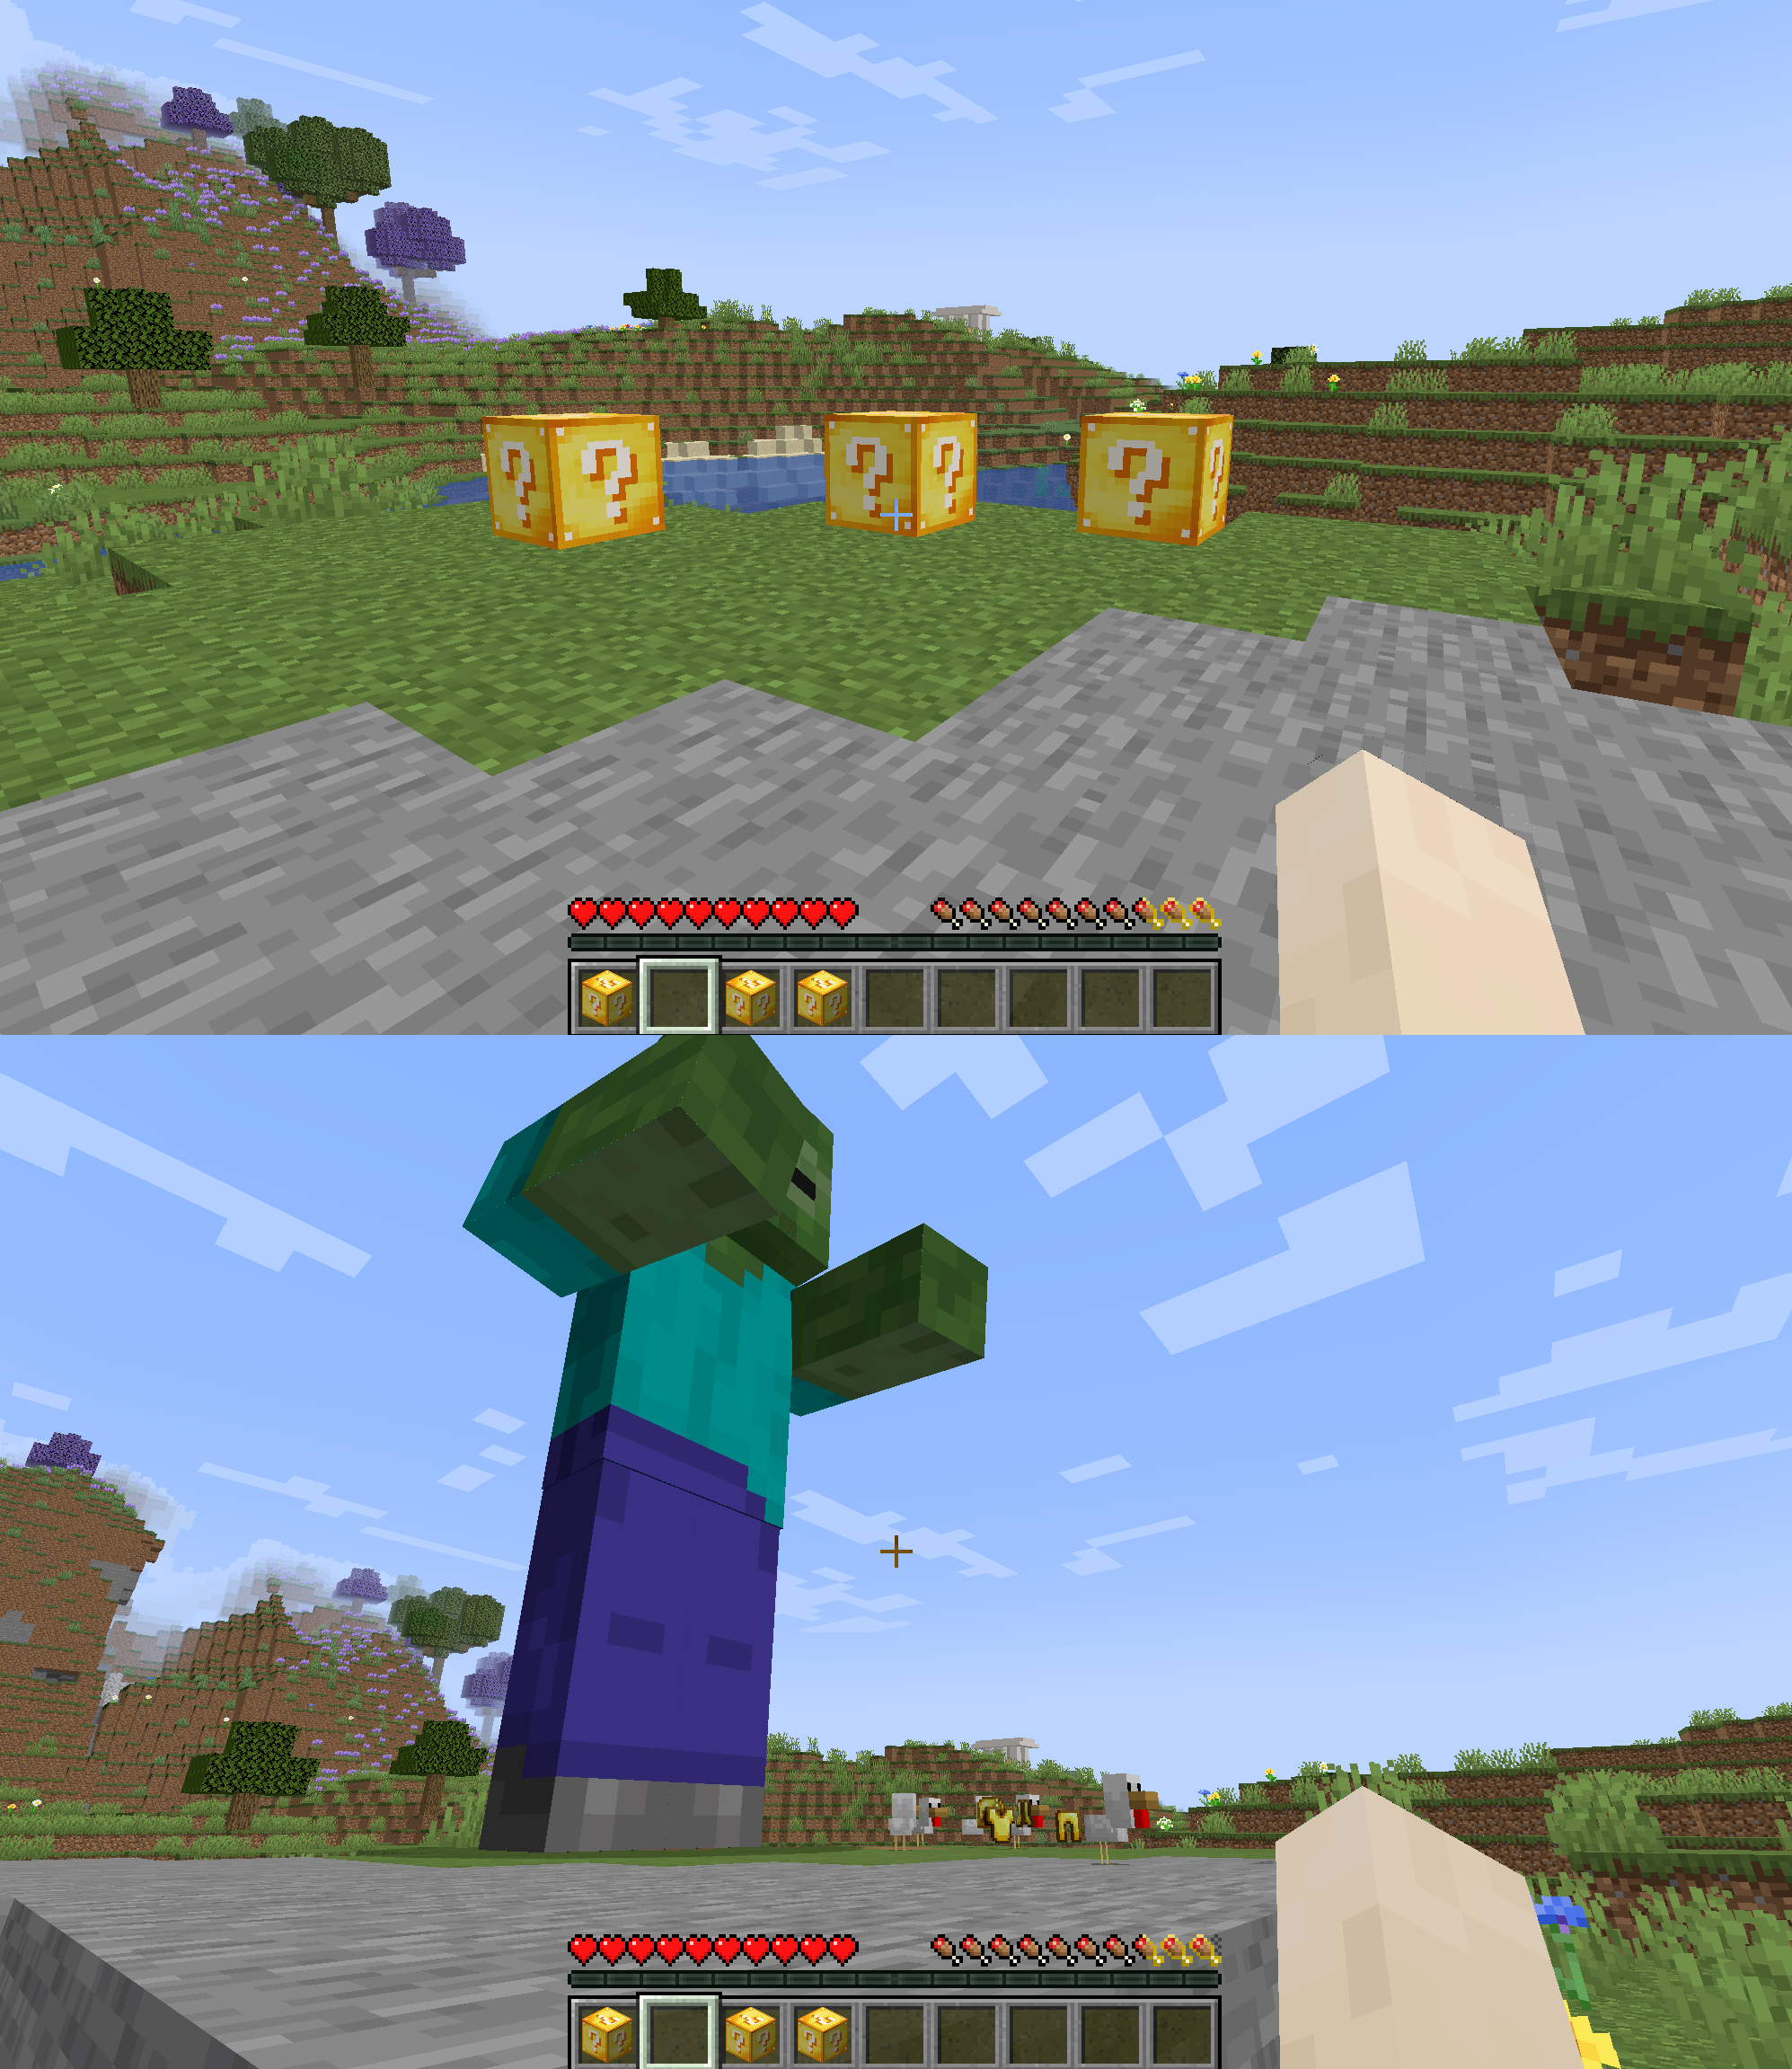 Three Lucky Blocks in Minecraft, and the results that came from them.